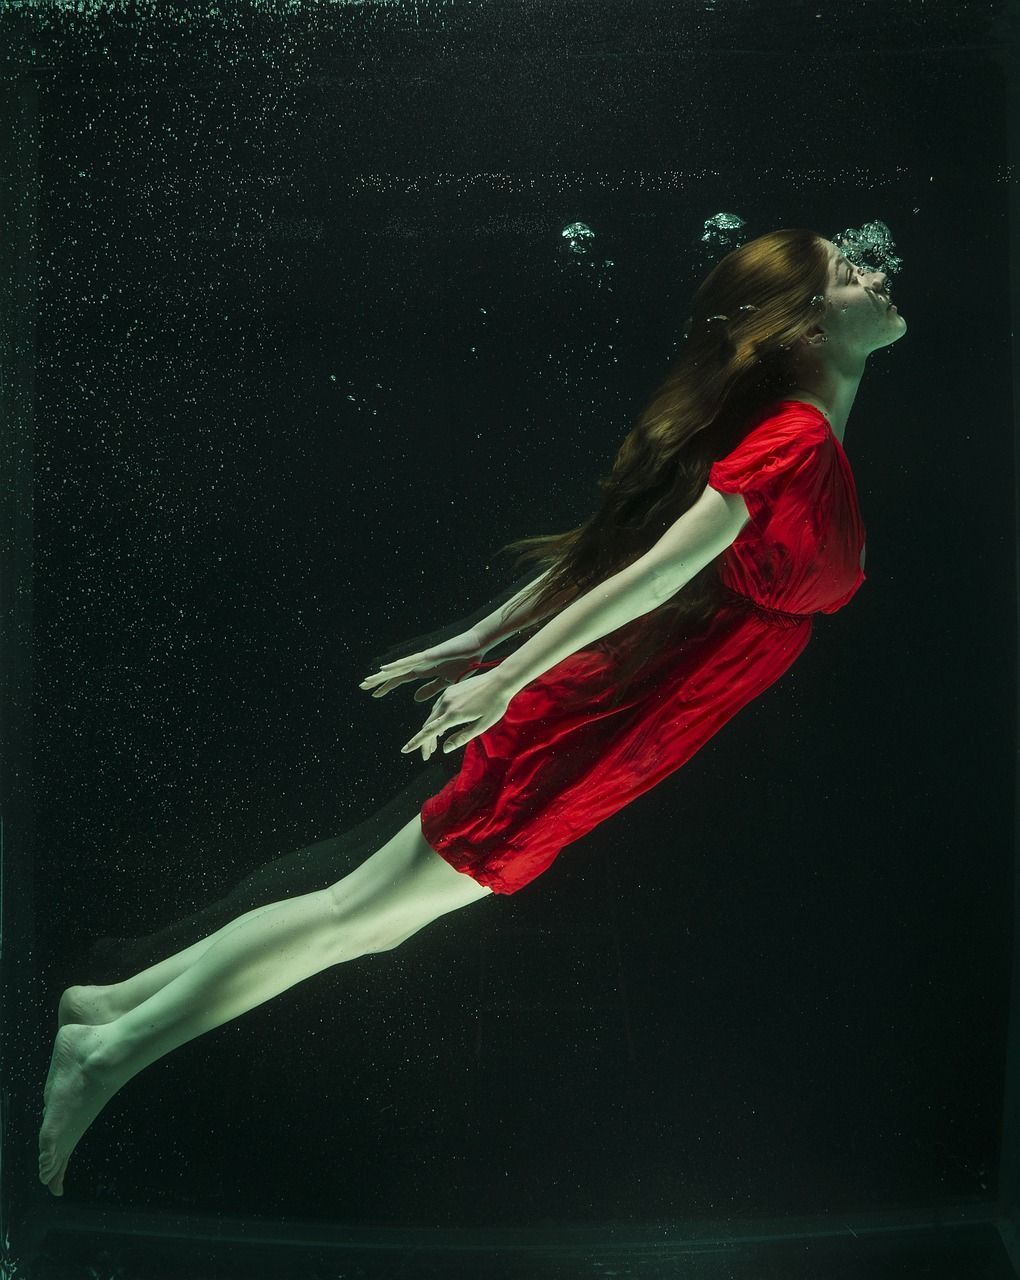 Photo shows Girl in a red dress, under water, blowing bubbles of air as she dives back up towards the surface